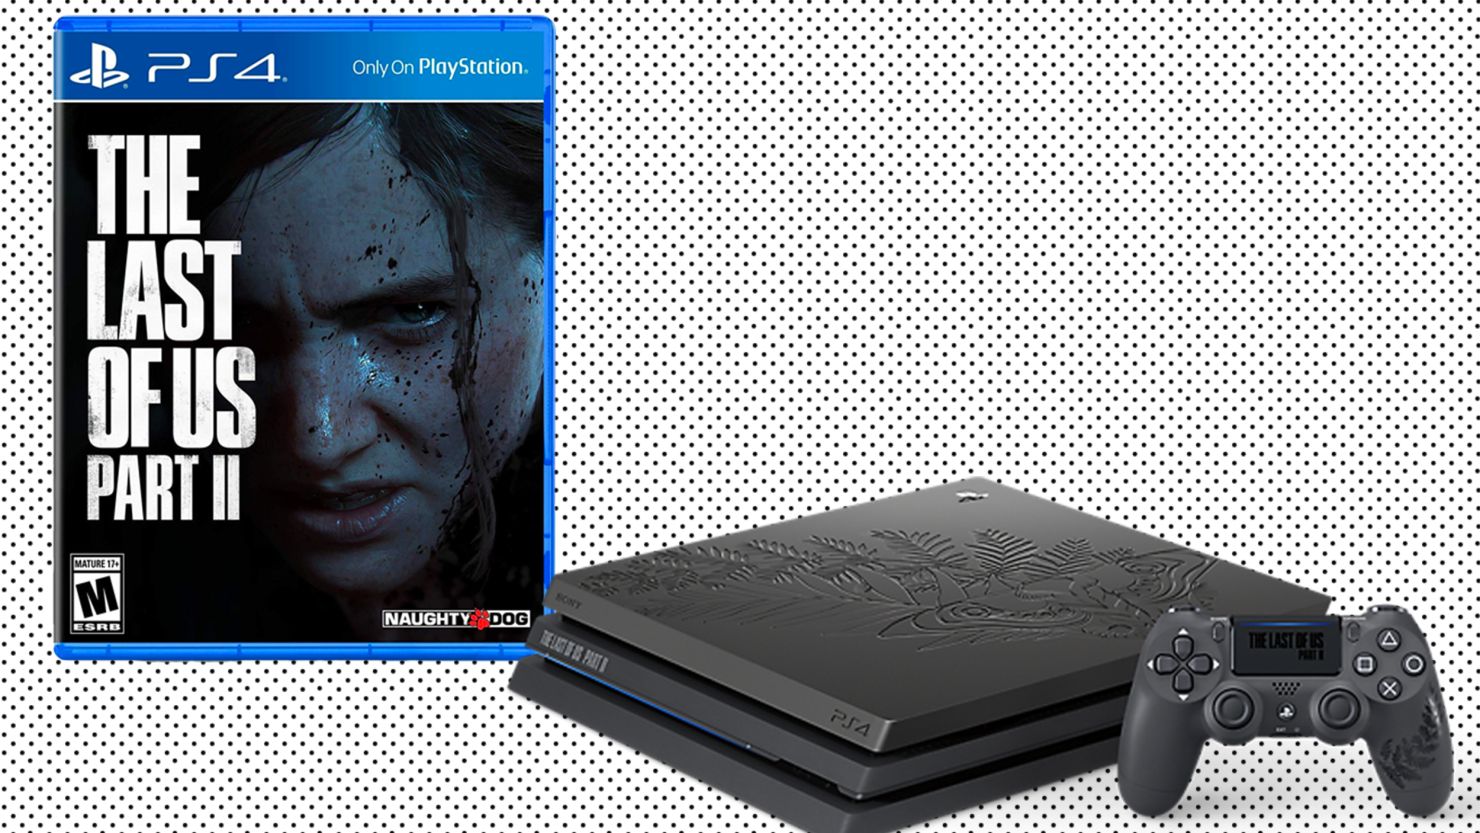 PS4 releases The Last of Us 2 special edition bundle for preorder